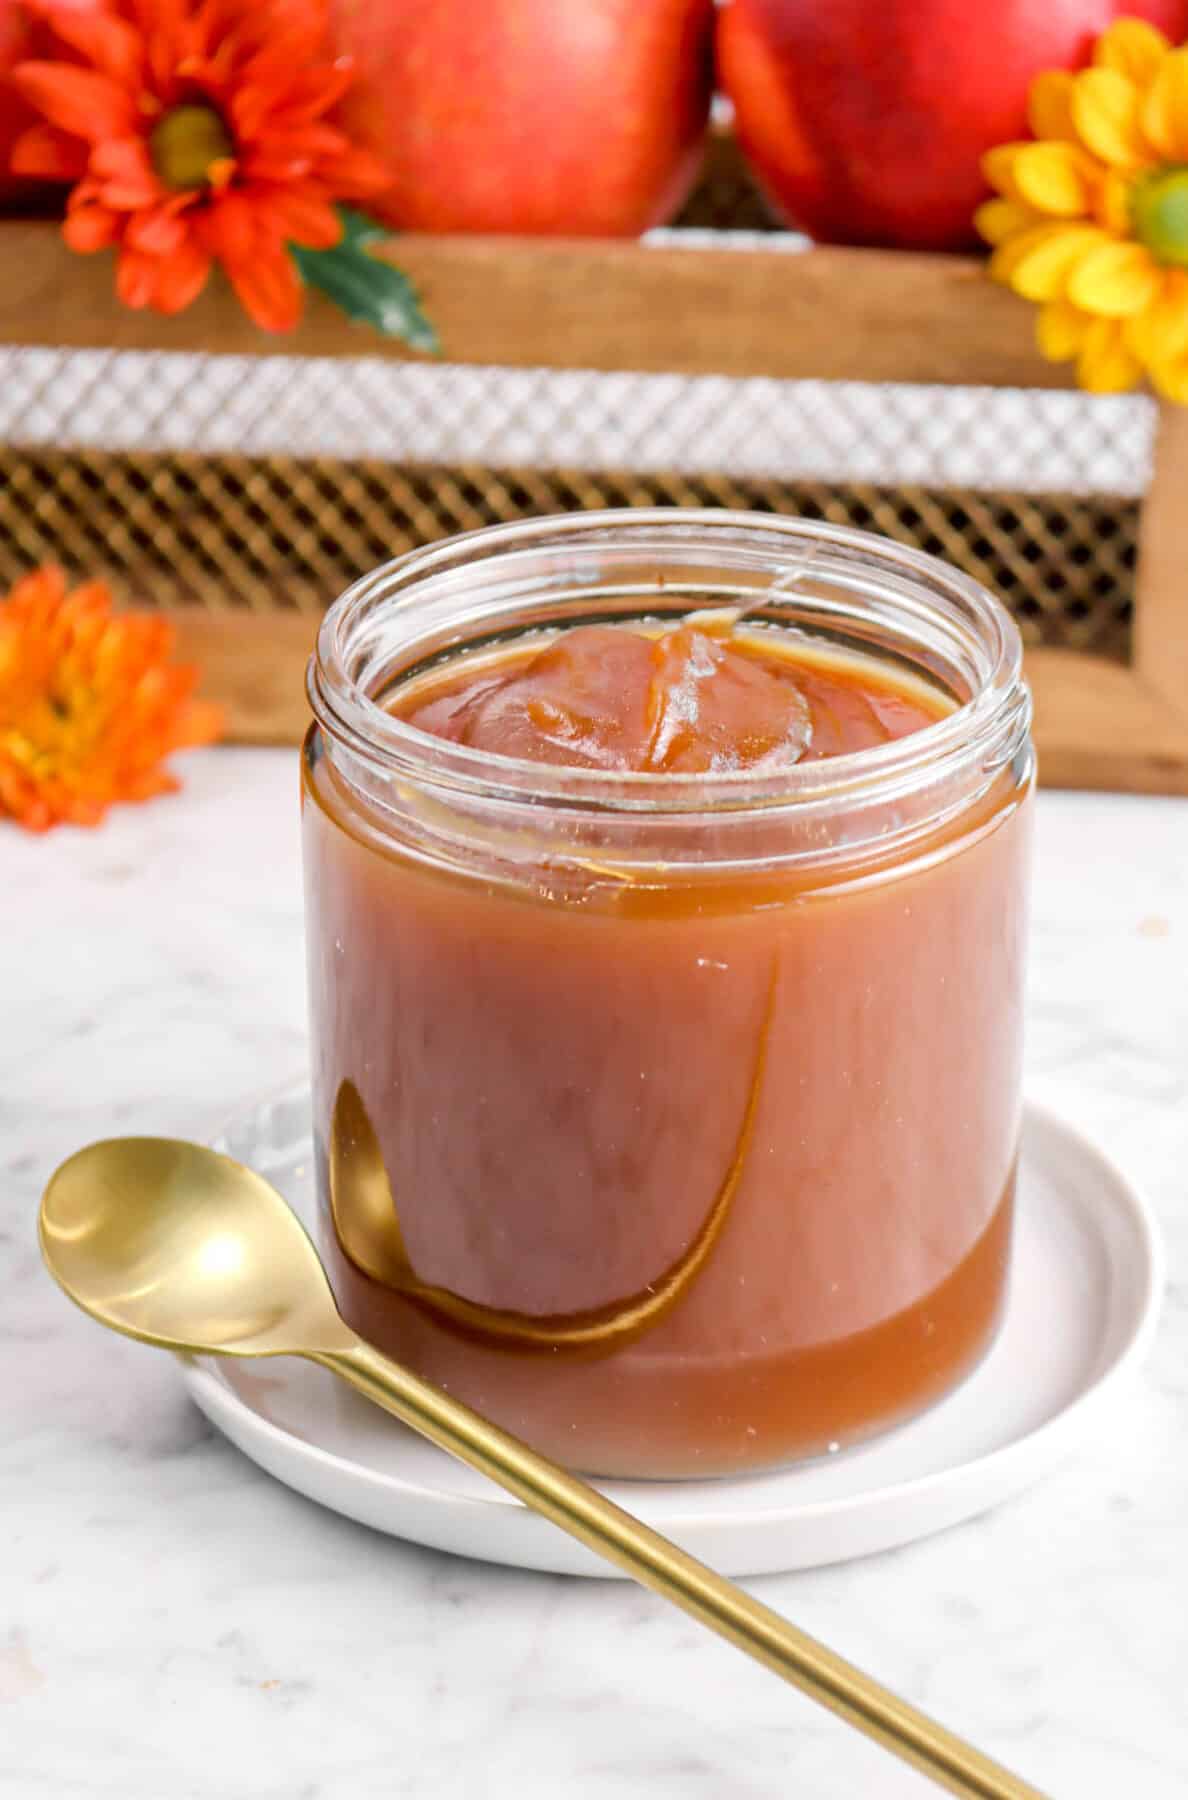 apple butter in a glass jar on a white plate with a gold spoon, flowers, and apples behind